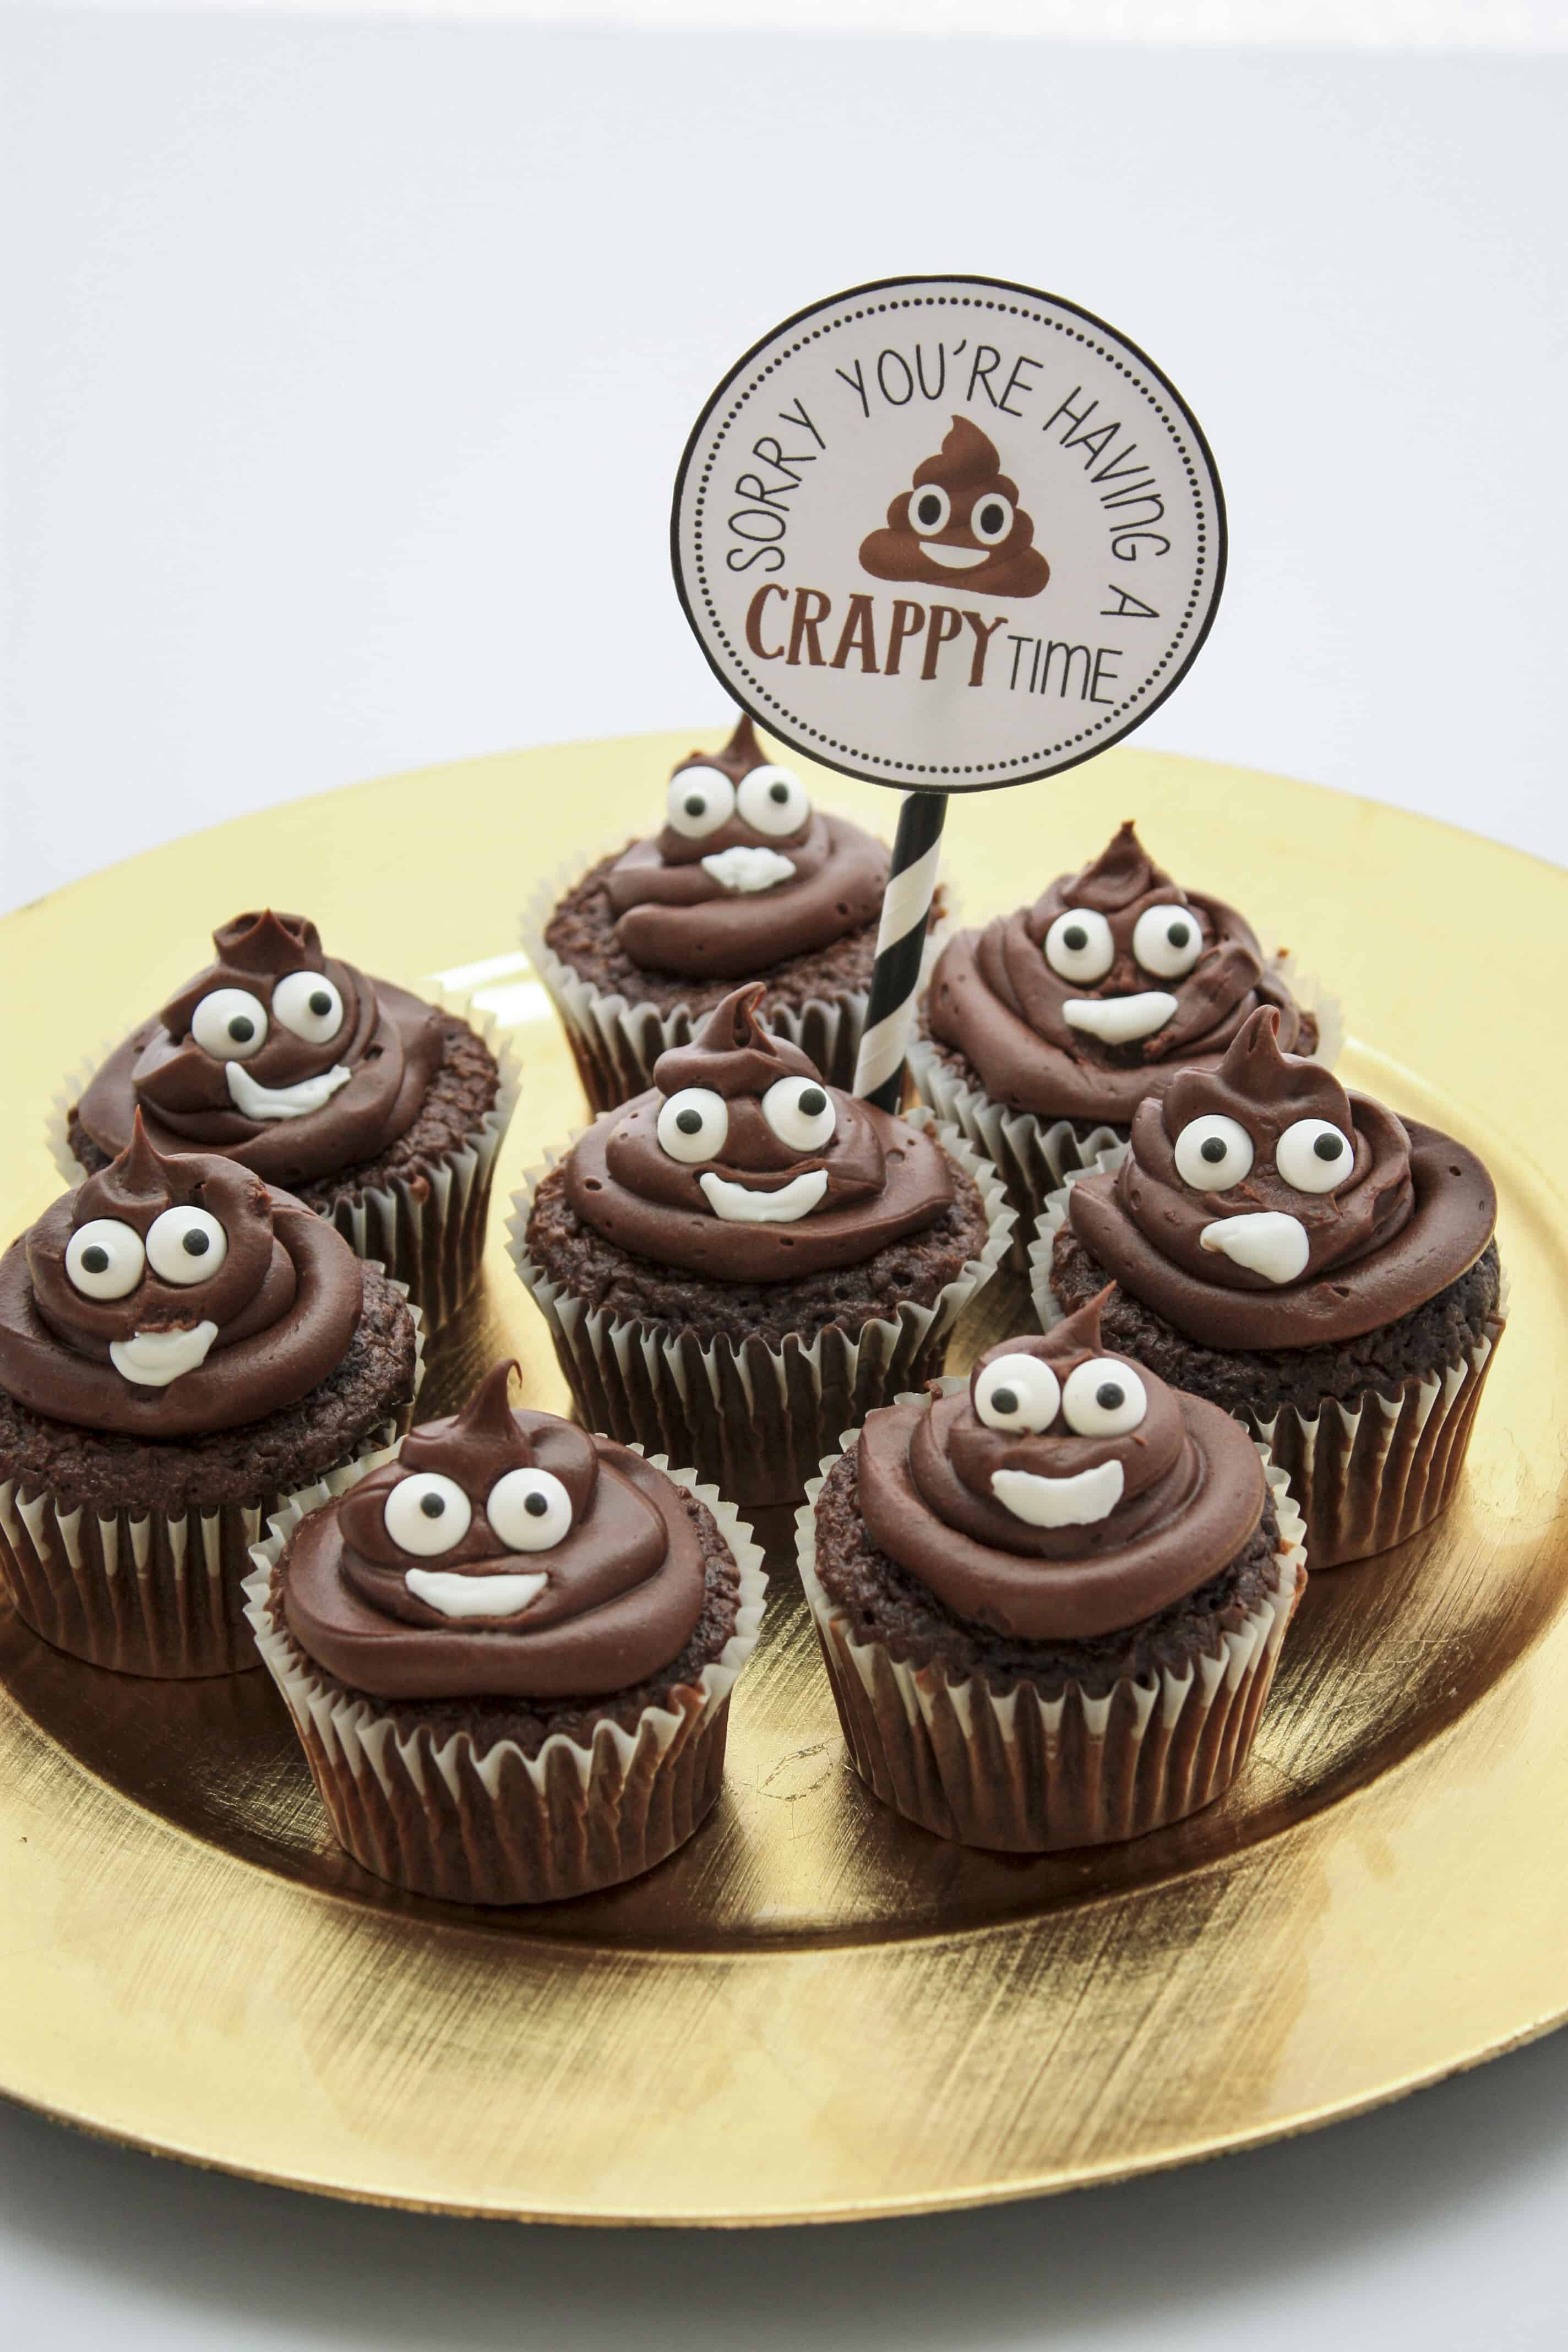 Poop Emoji Cupcakes With Free Gift Tag for Someone Having a Rough Day